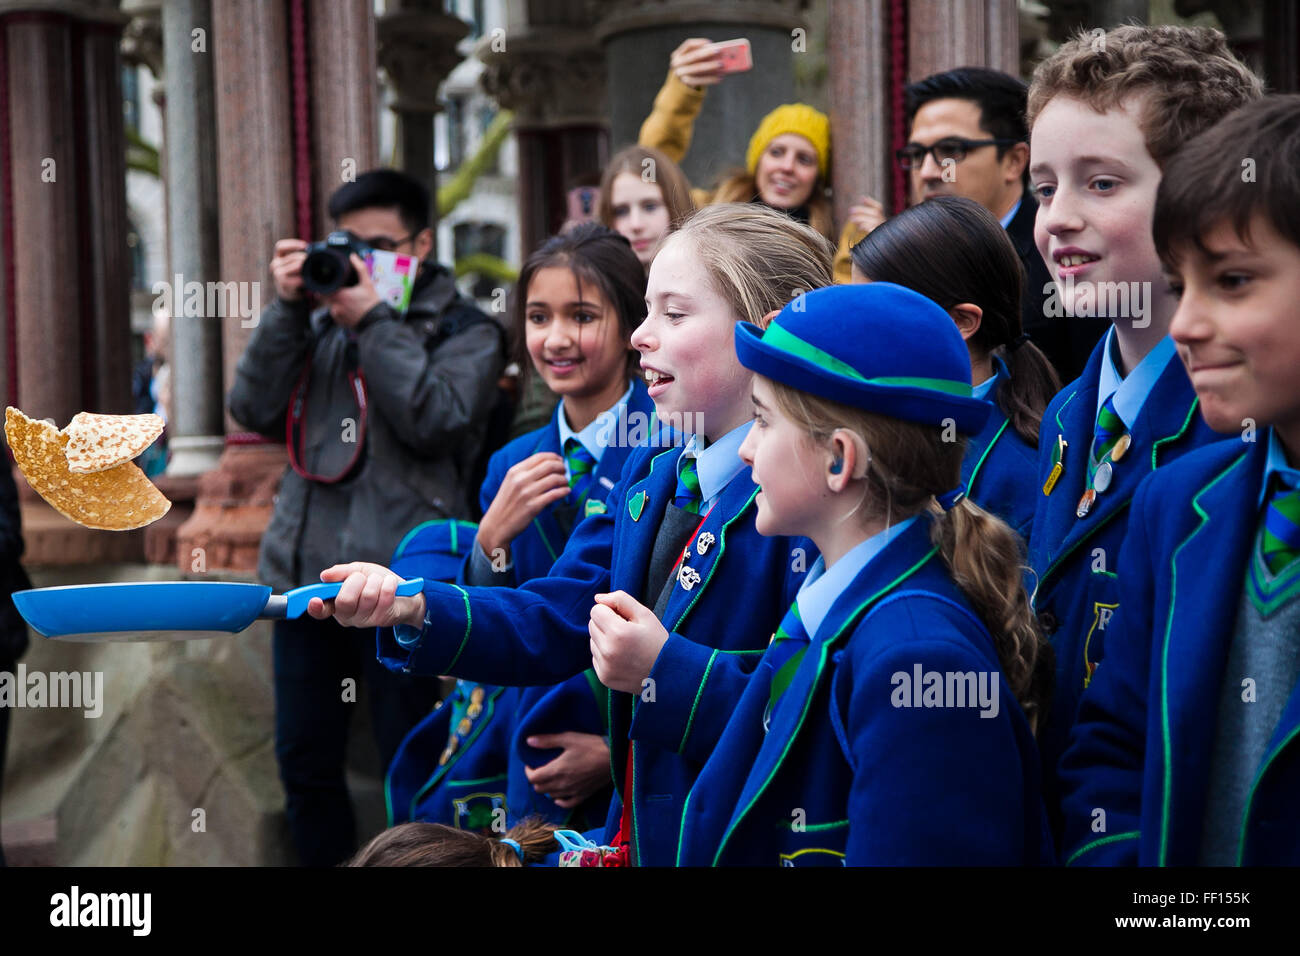 Westminster, London, United Kingdom. February 9th, 2016 -  A group of school children tossing pancakes at the Parliamentary pancake race in Victoria Gardens, Westminster.  Credit:  Dinendra Haria/Alamy Live News Stock Photo